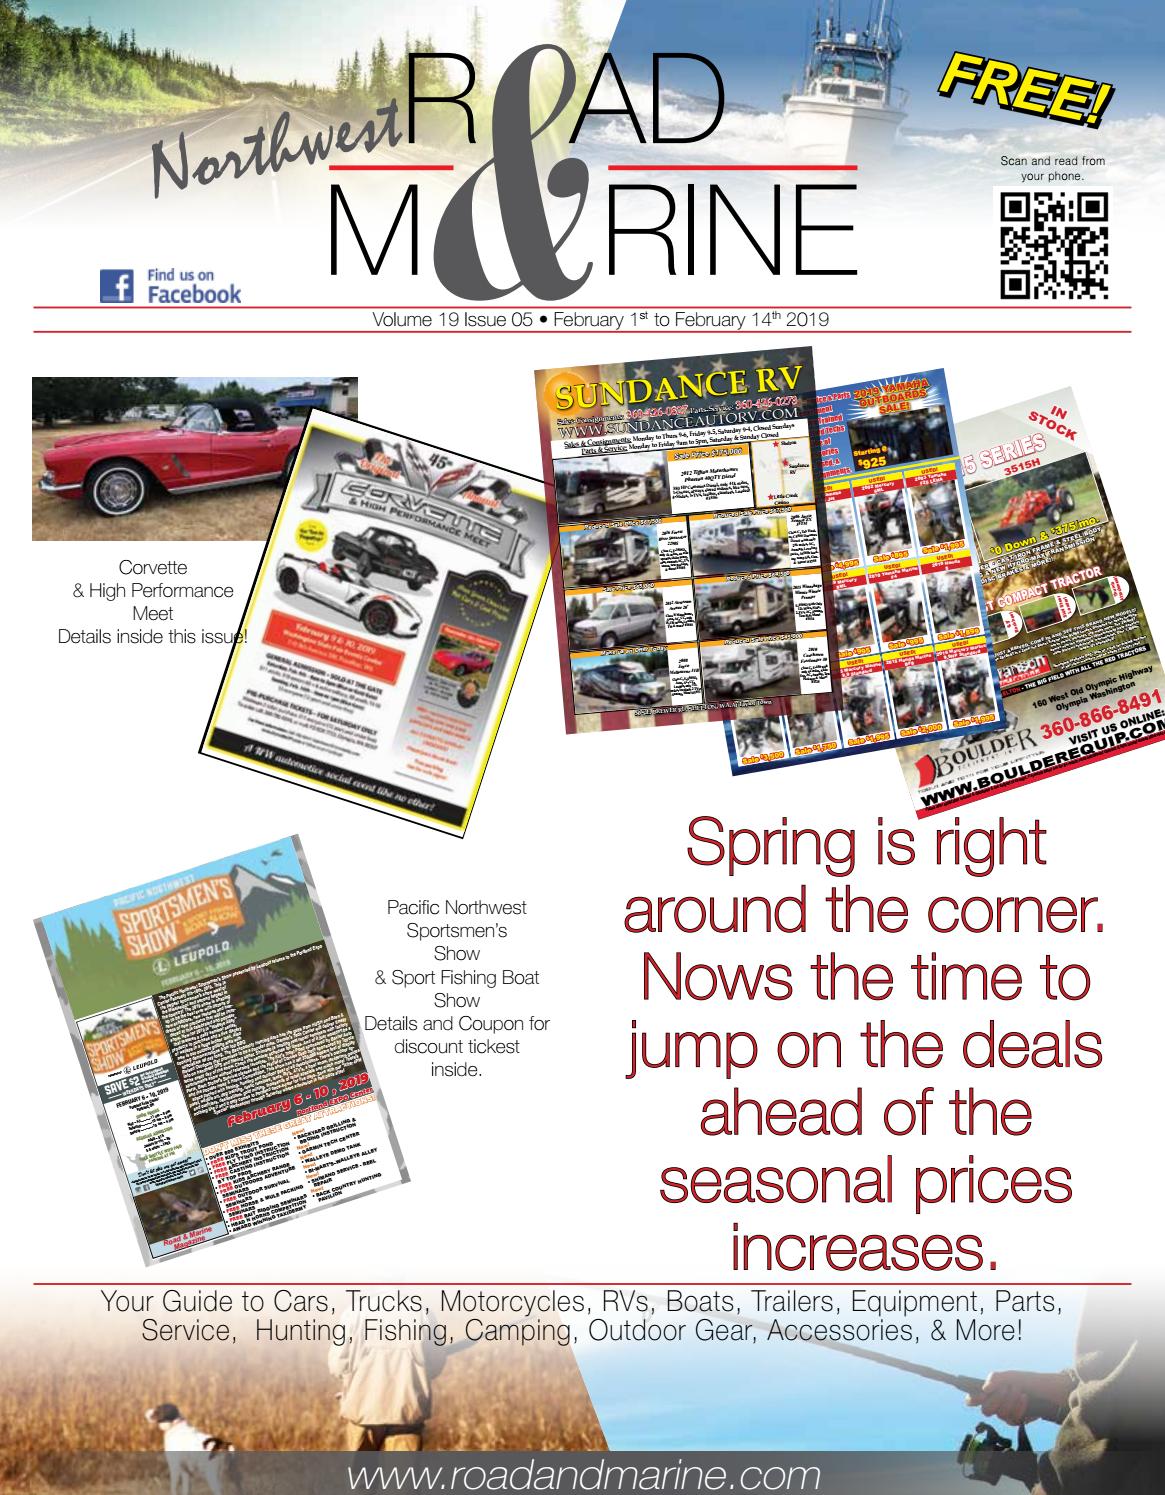 Solas Fireplace Best Of Road and Marine Magazine Vol 19 05 by Road & Marine